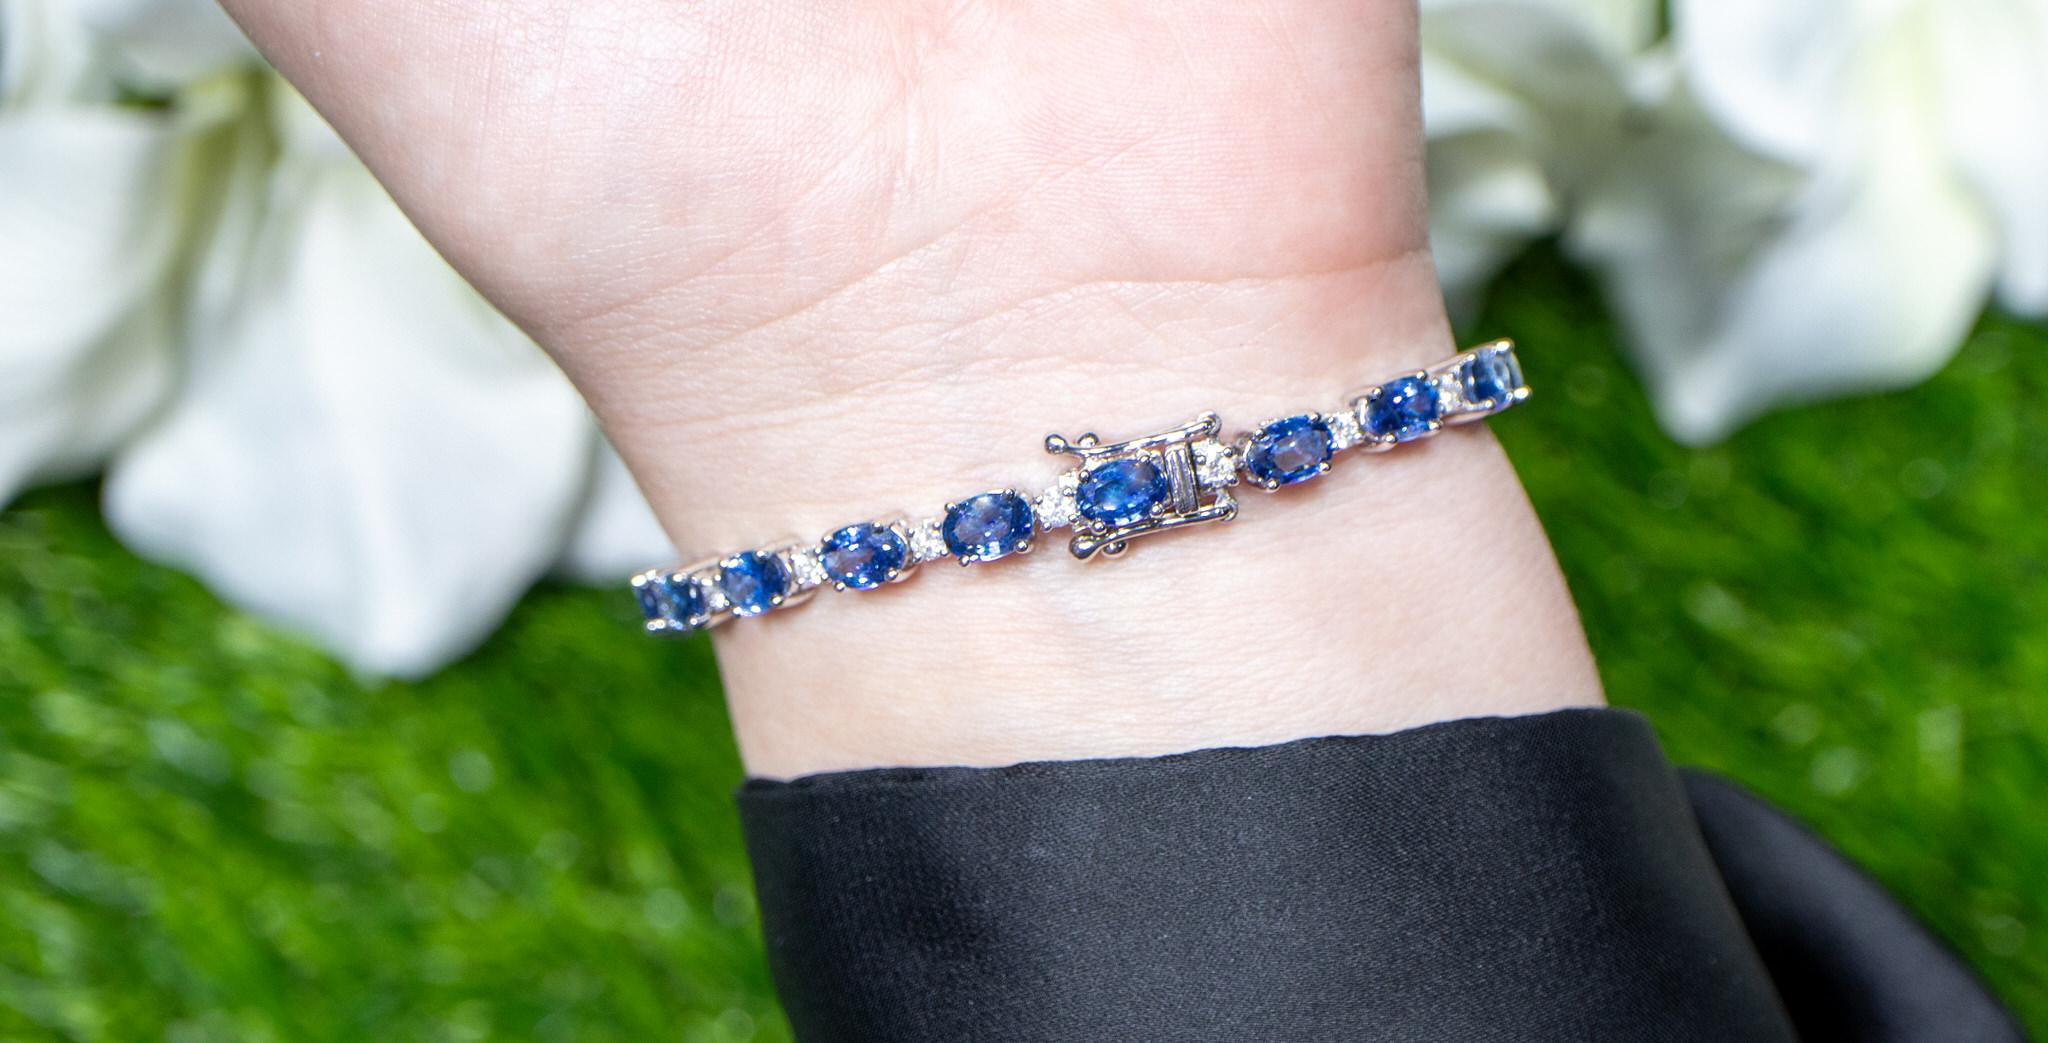 Blue Sapphire Tennis Bracelet Diamond Links 13 Carats 18K White Gold In Excellent Condition For Sale In Laguna Niguel, CA